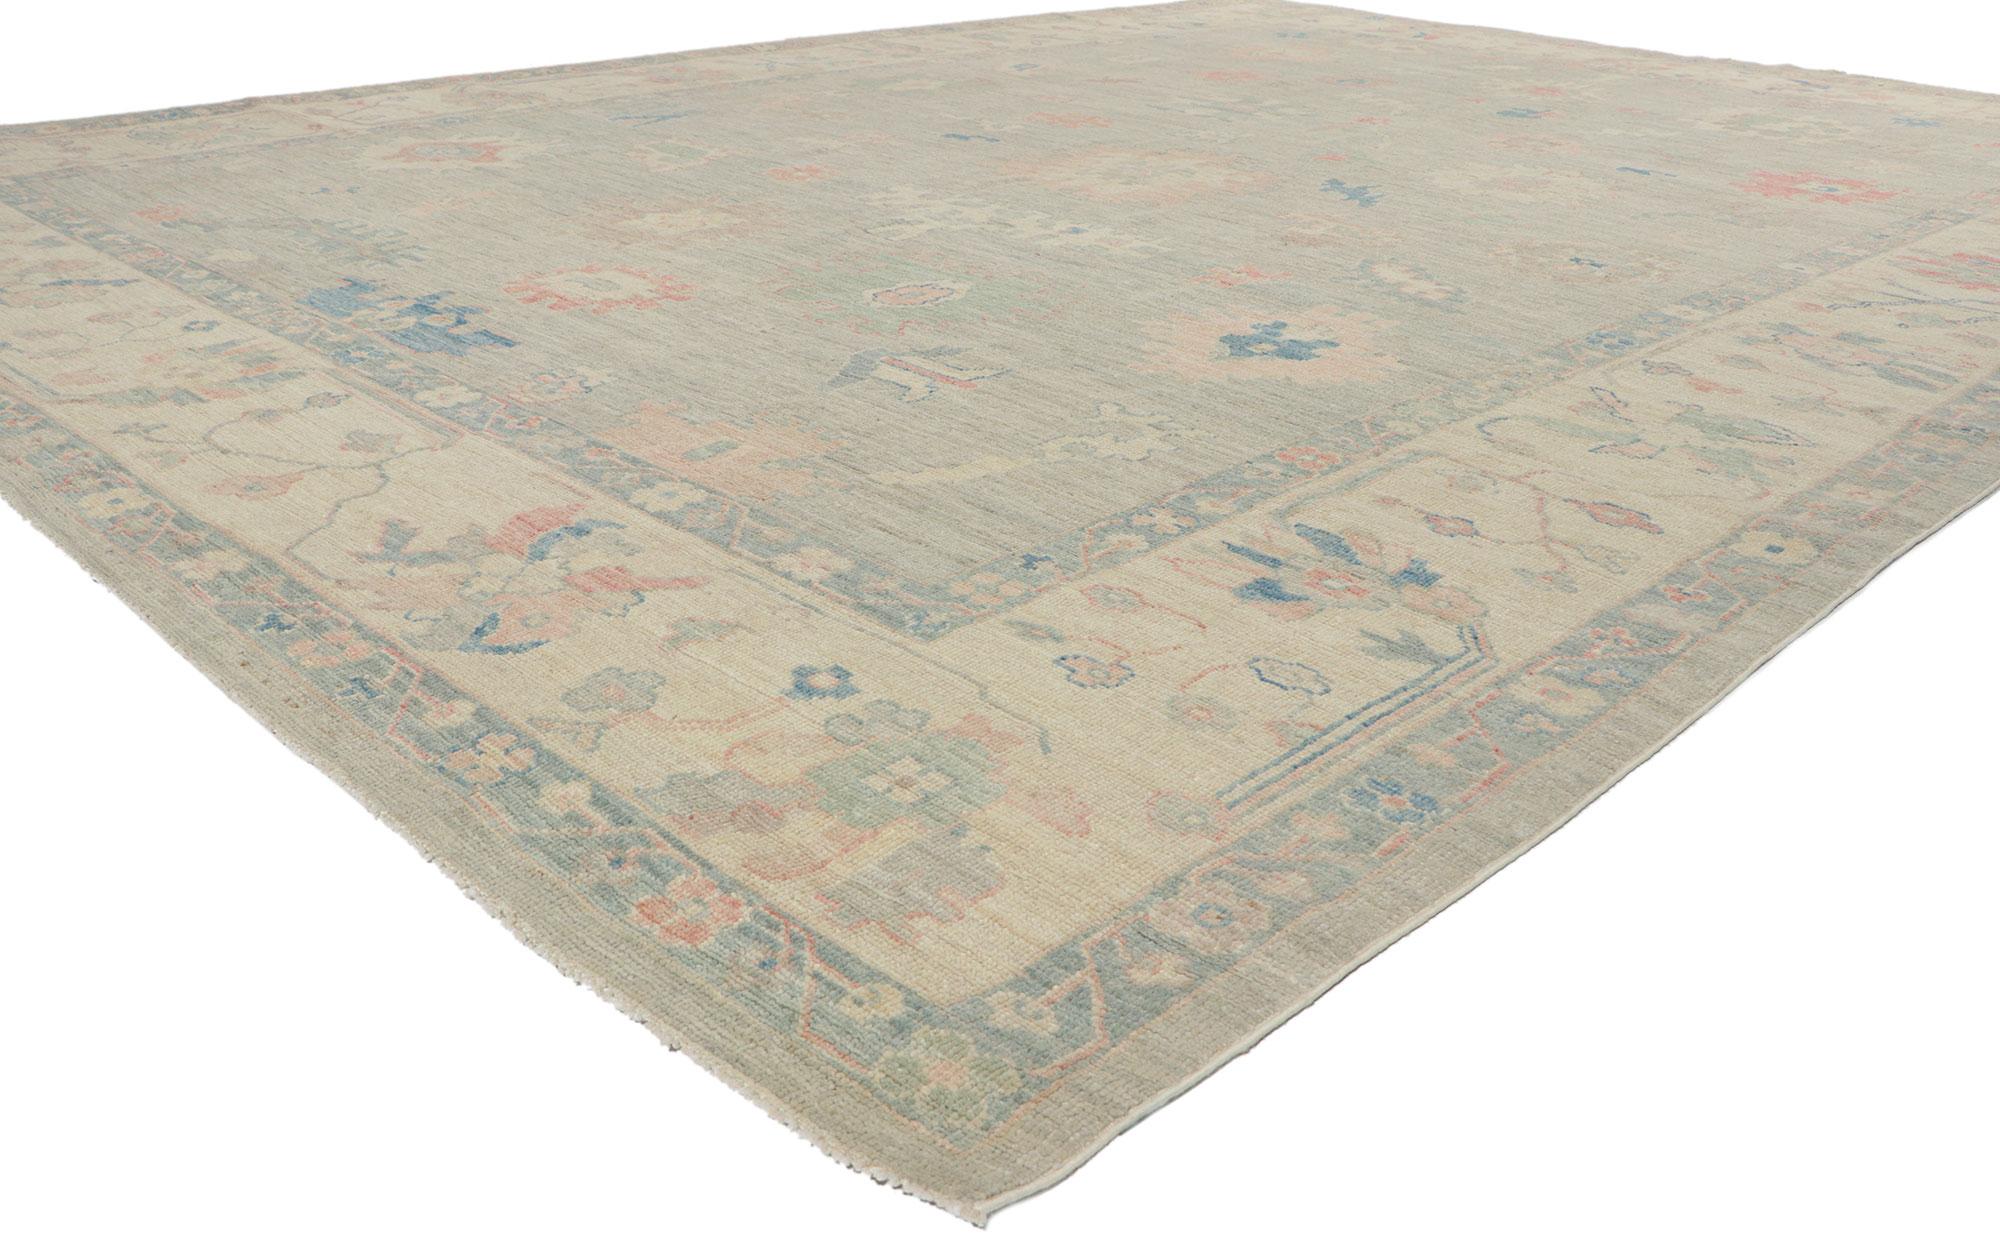 80927 contemporary oushak rug with Modern style, 10'01 x 13'09.
    